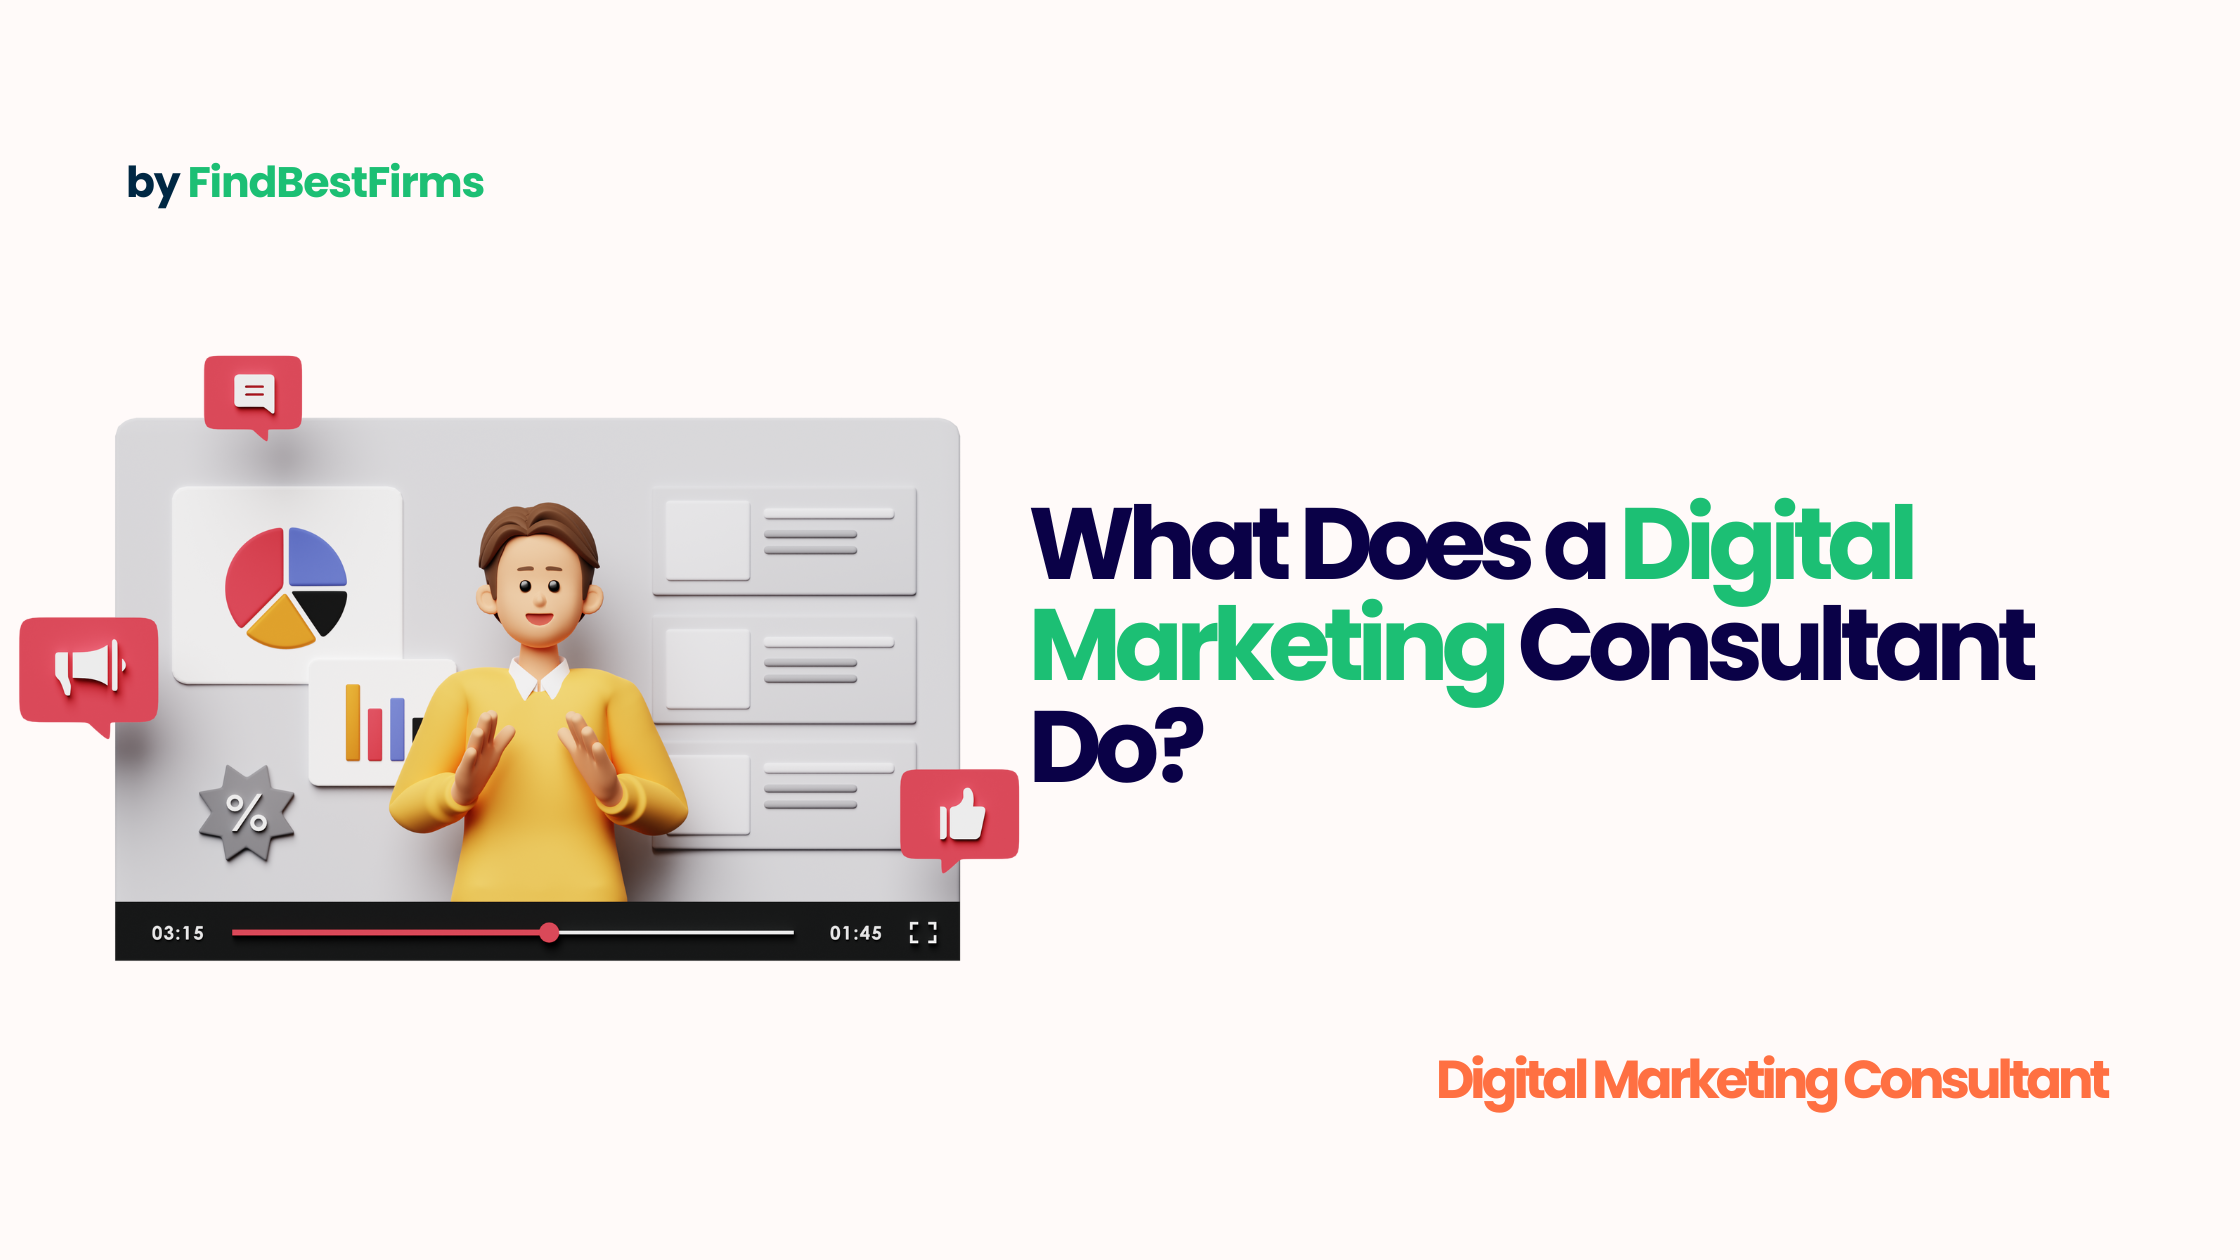 What Does a Digital Marketing Consultant Do (1)